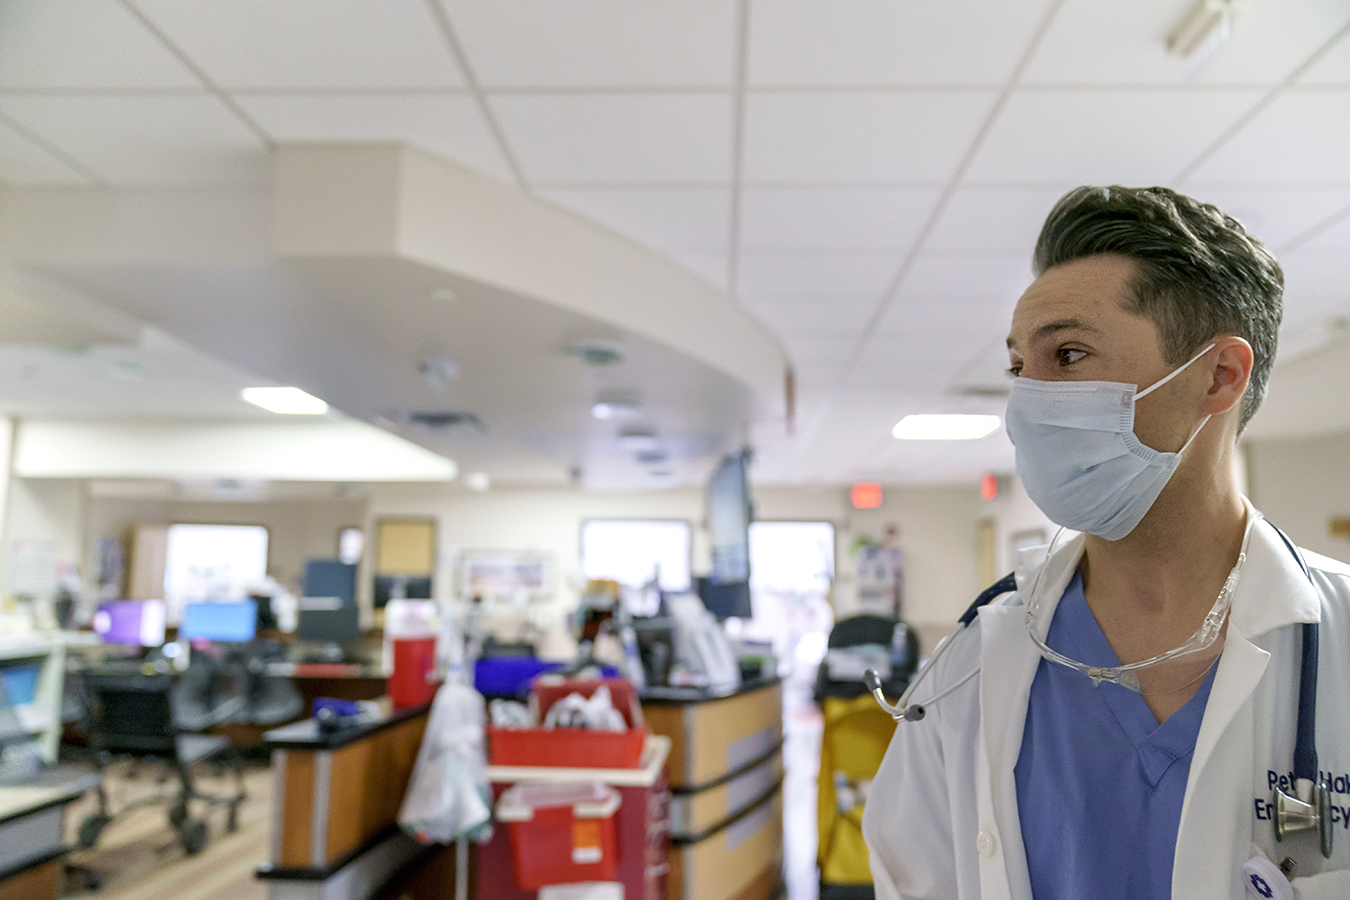 A male doctor stands in the hospital emergency department